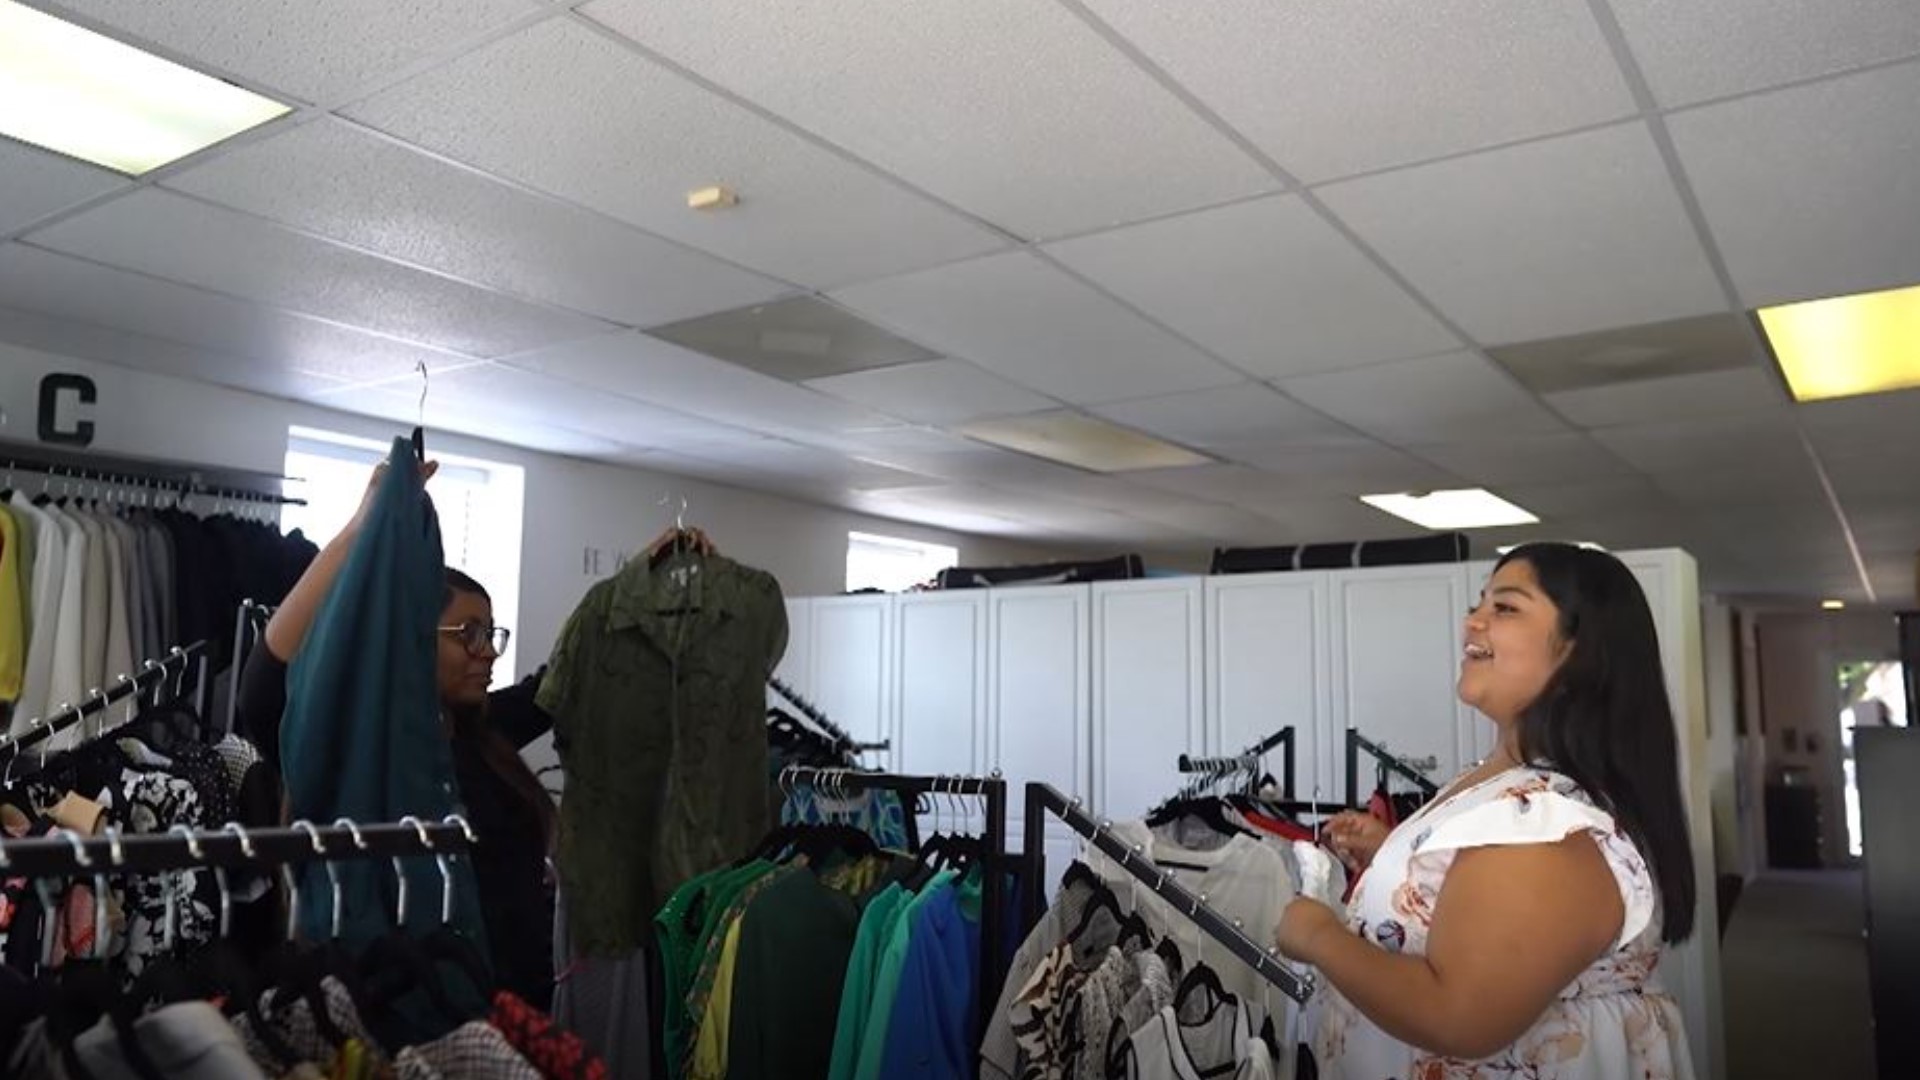 New Professional Clothing Closet Provides Free Dress Clothes to Students  Who Need Them, BU Today